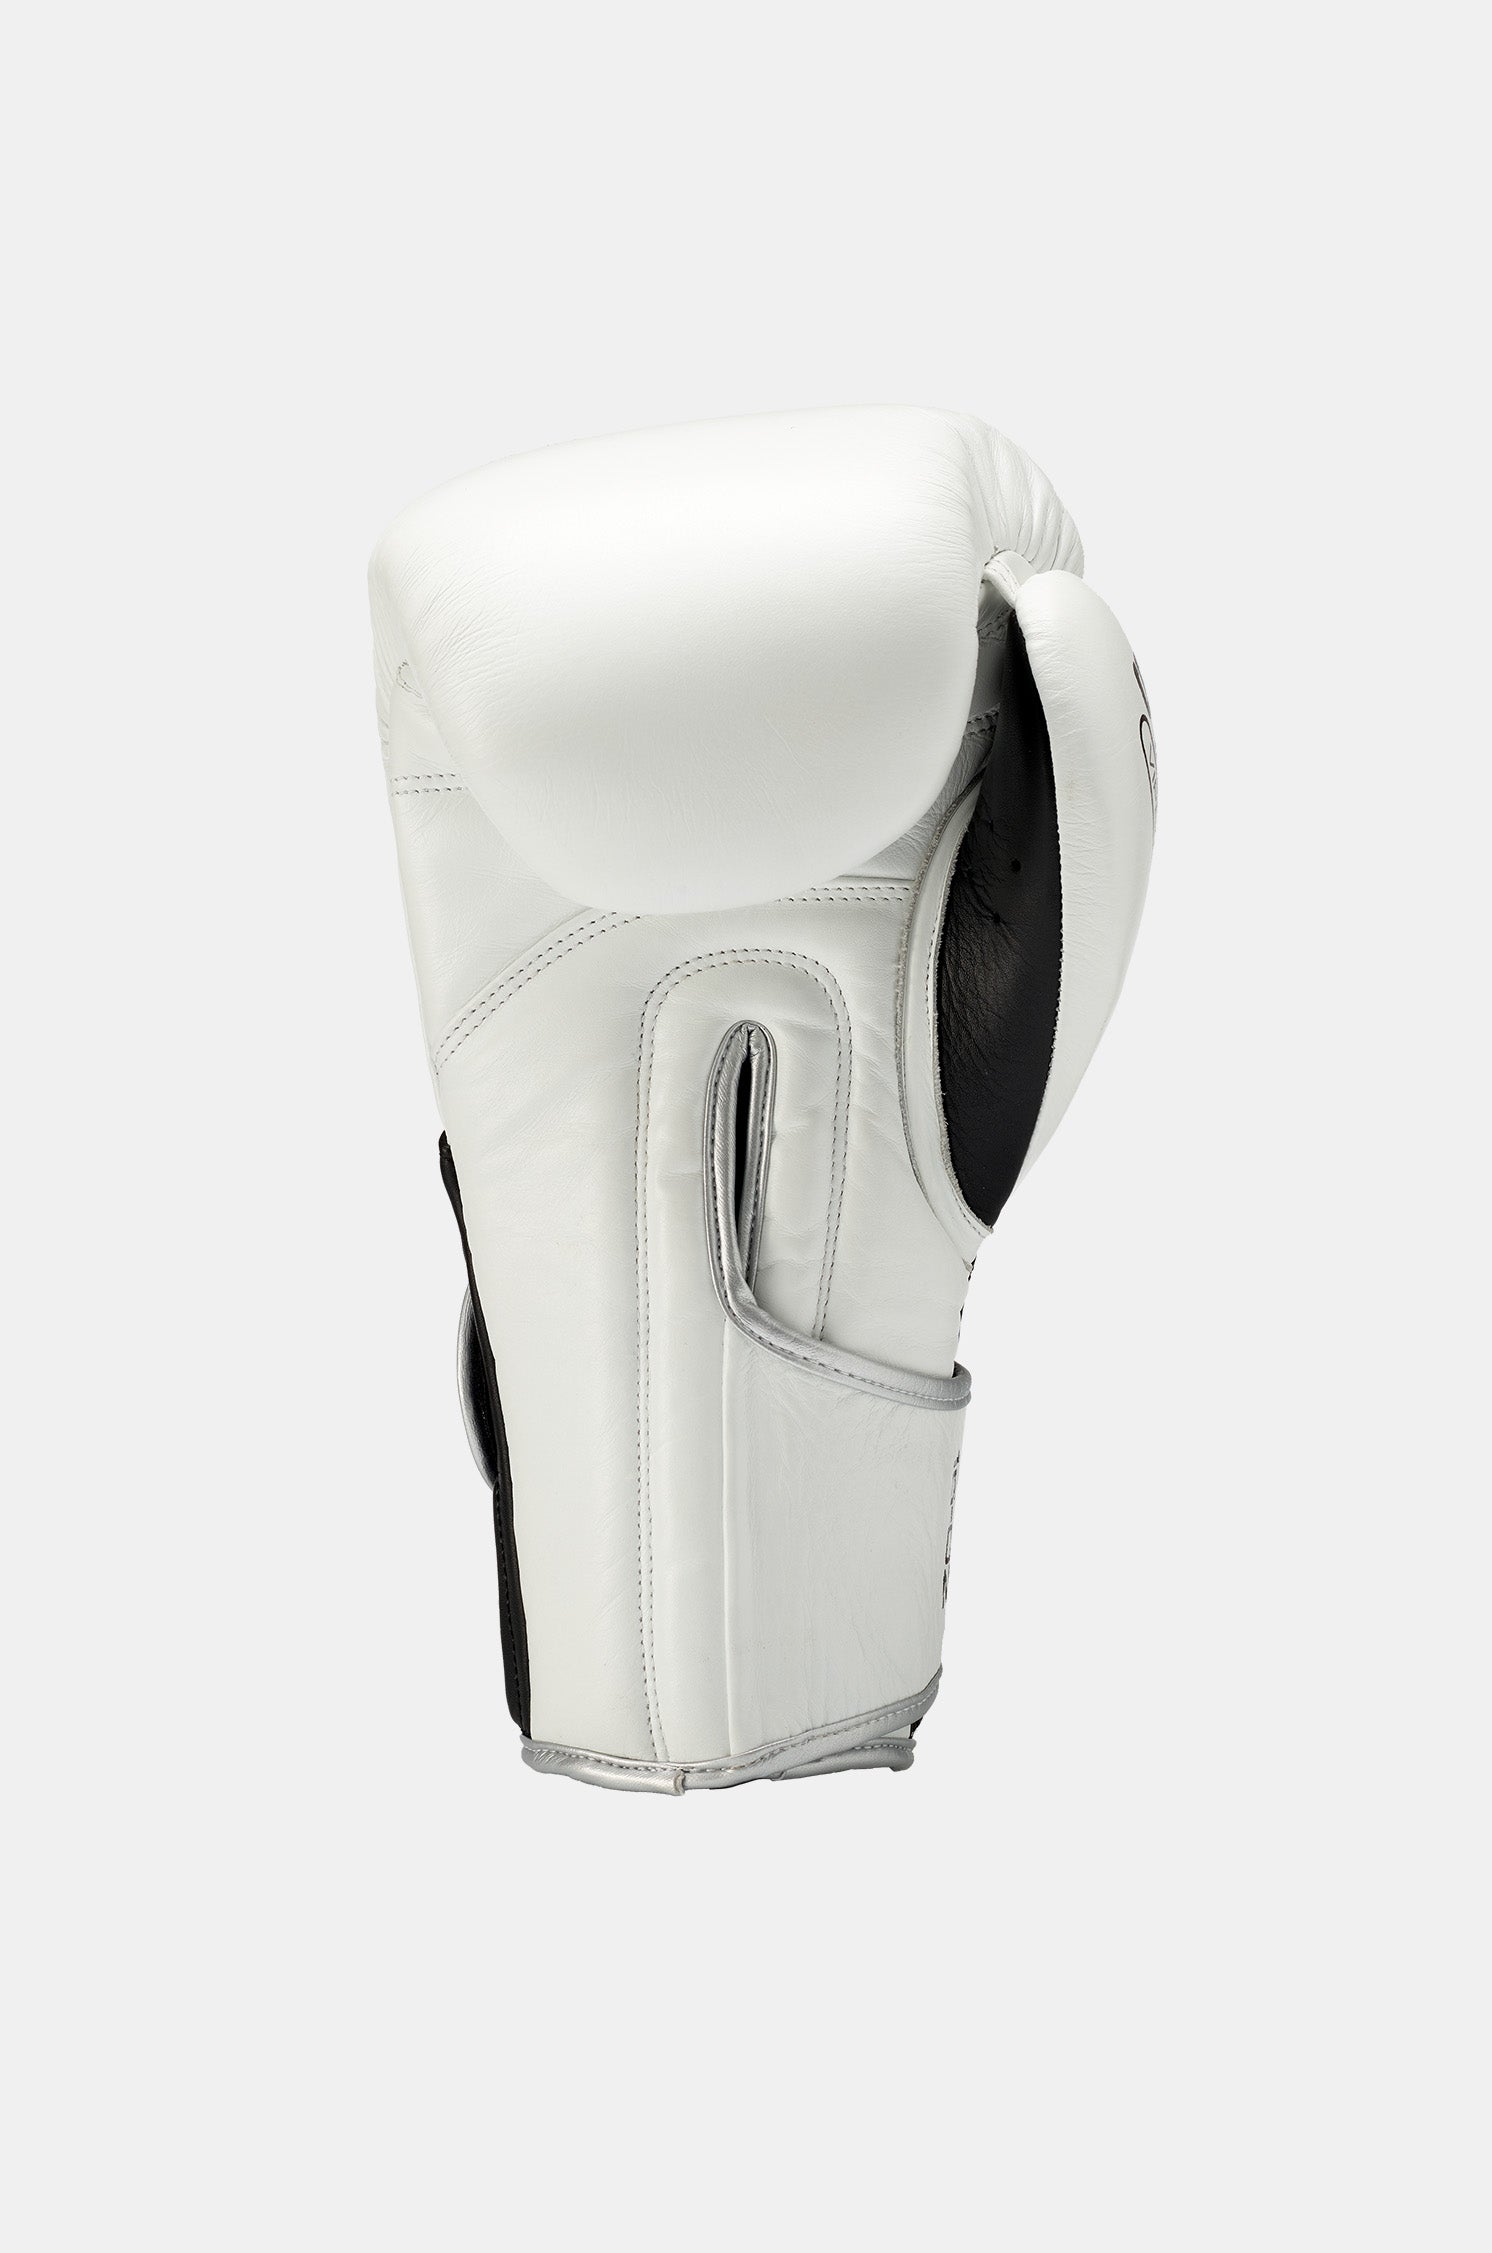 Viper X Boxing Sparring Glove - Velcro